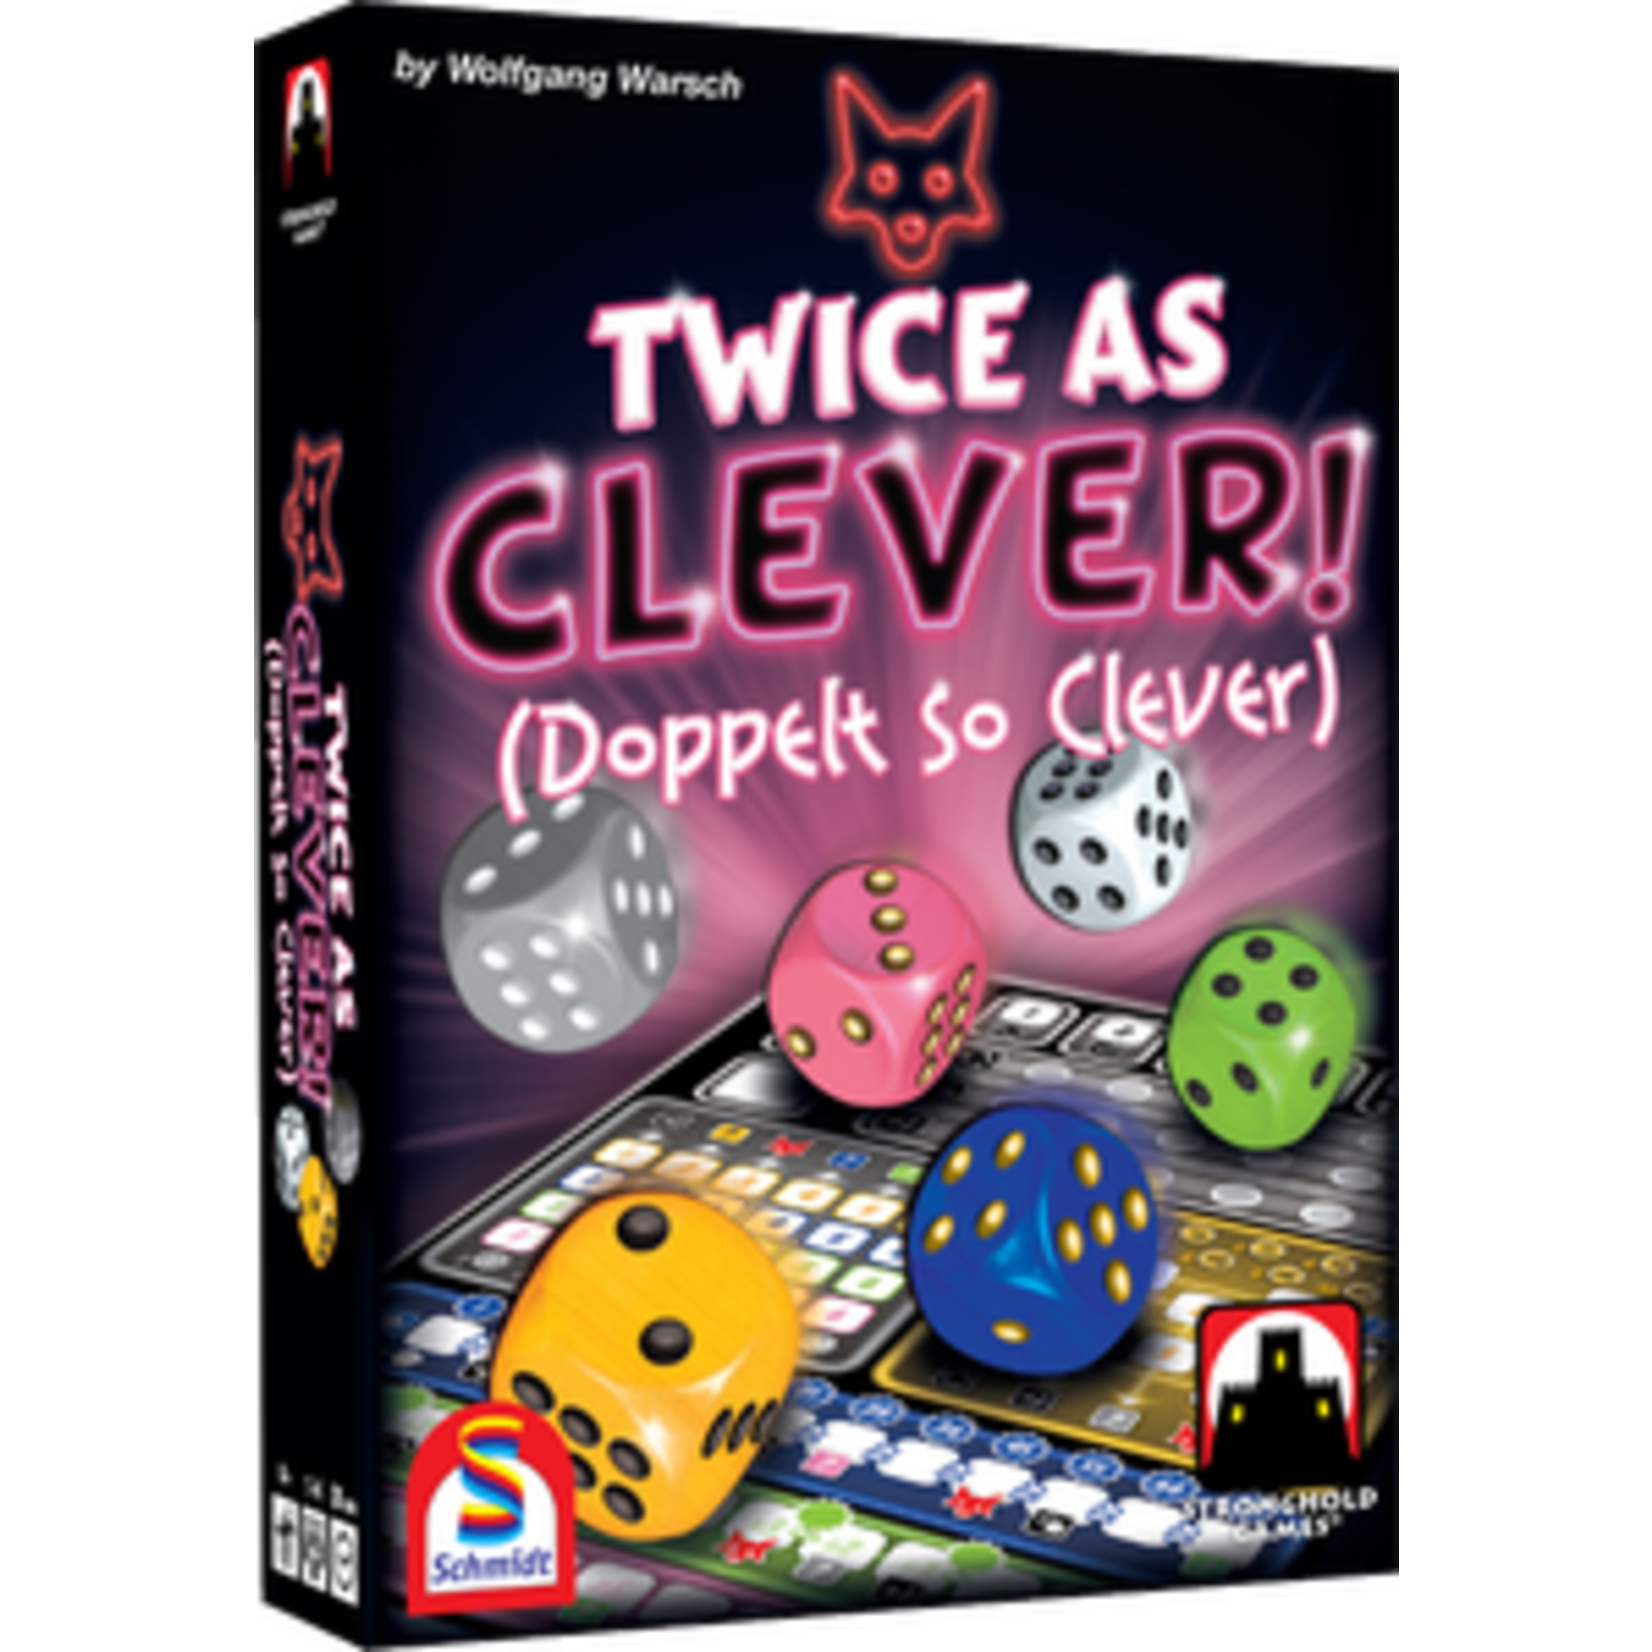 Doppelt so Clever (Twice as Clever!) Board Game